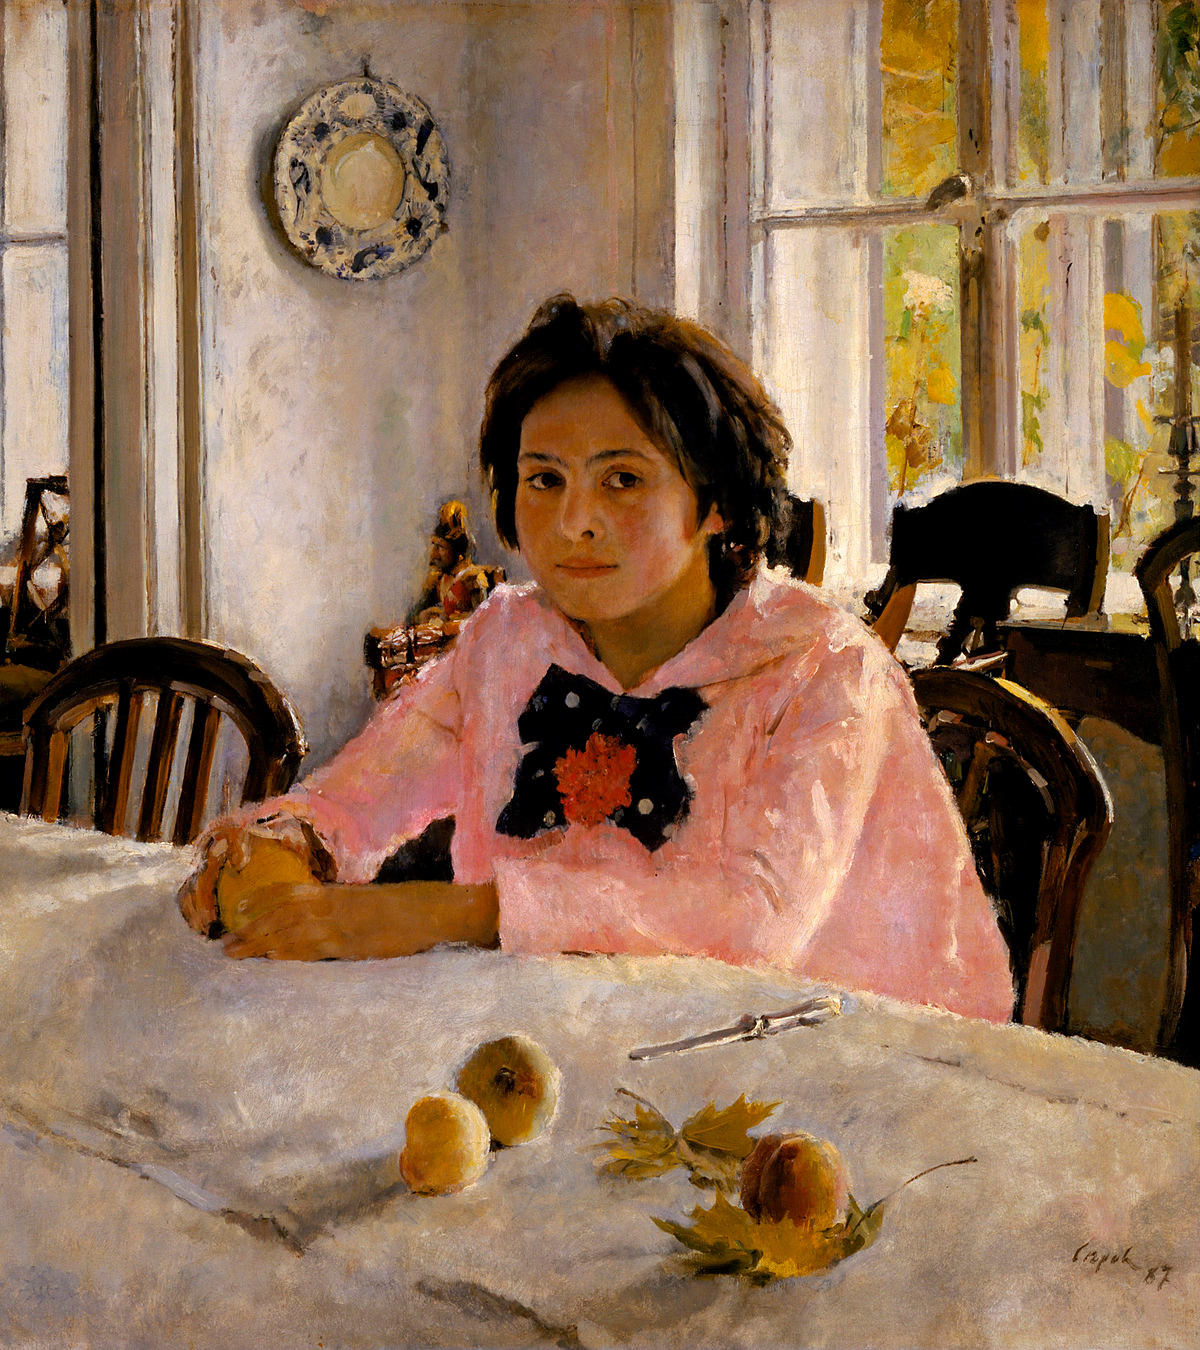 Valentin Serov. The girl with peaches (1887). This is actually a portrait of Savva Mamontov's daughter Vera and it was painted in Abramtsevo